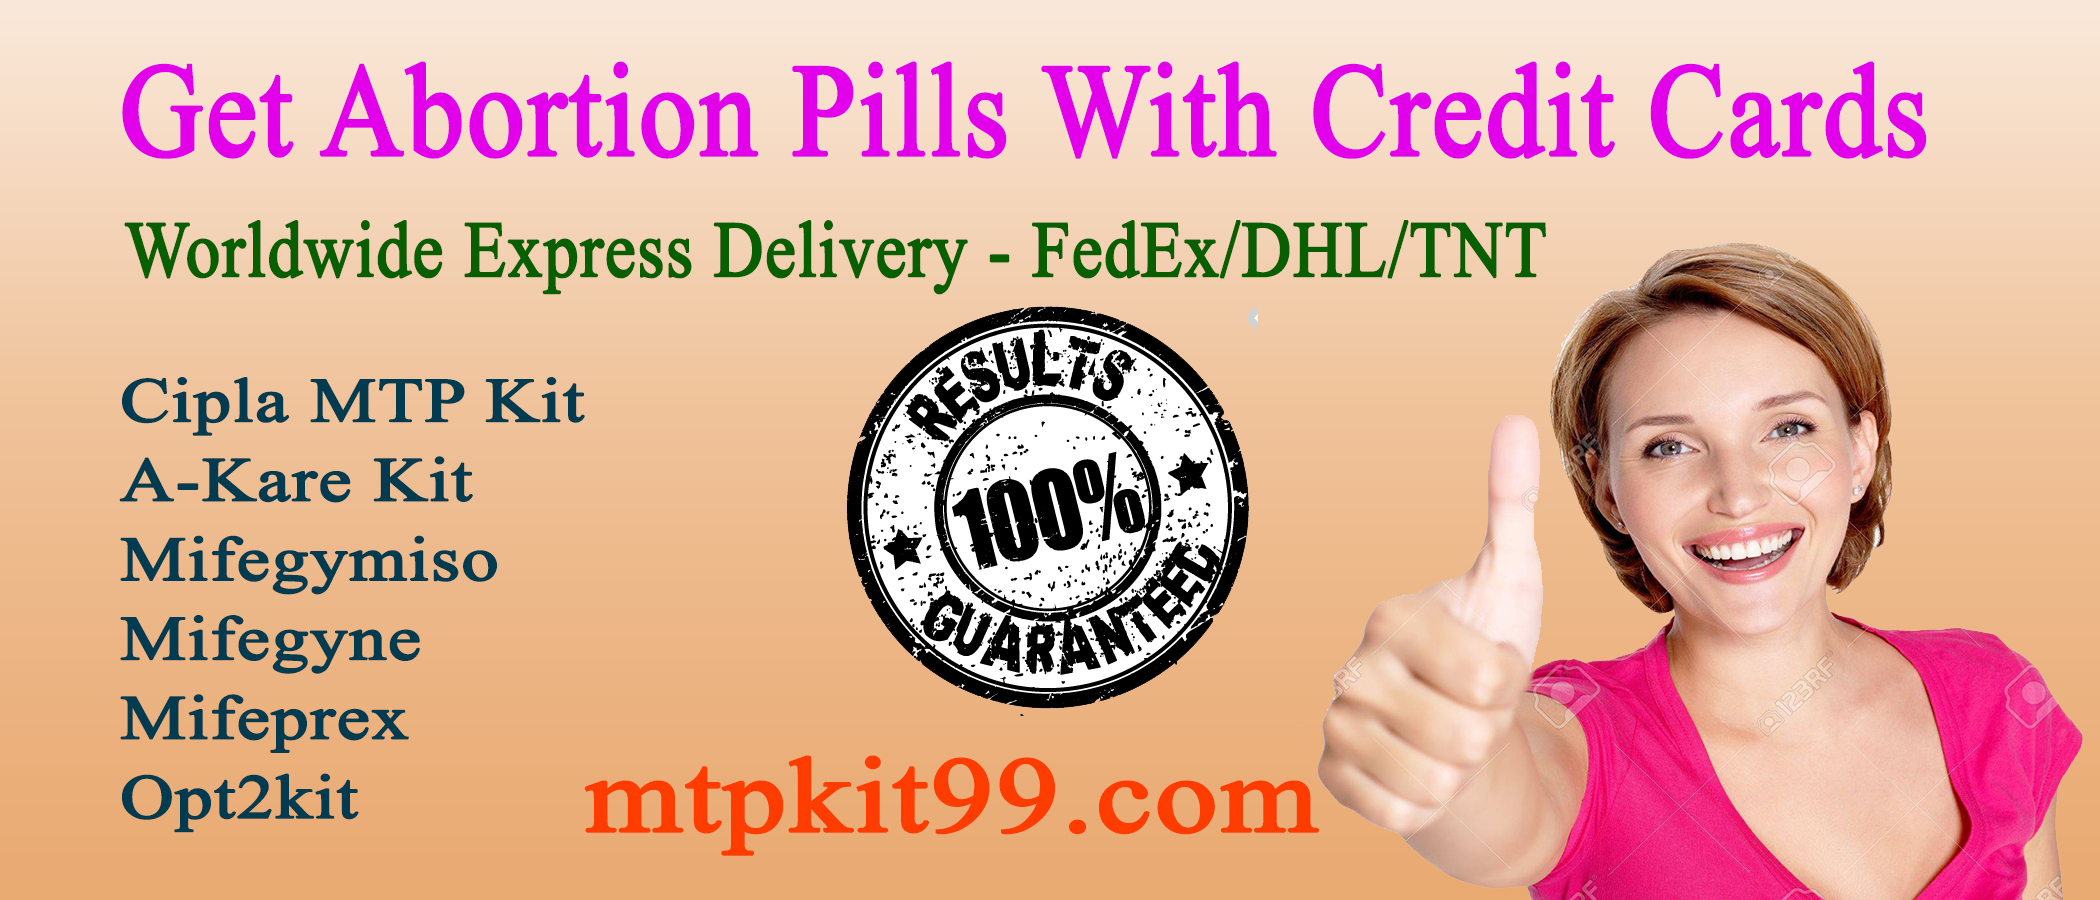 Get Abortion Pills with Credit Cards